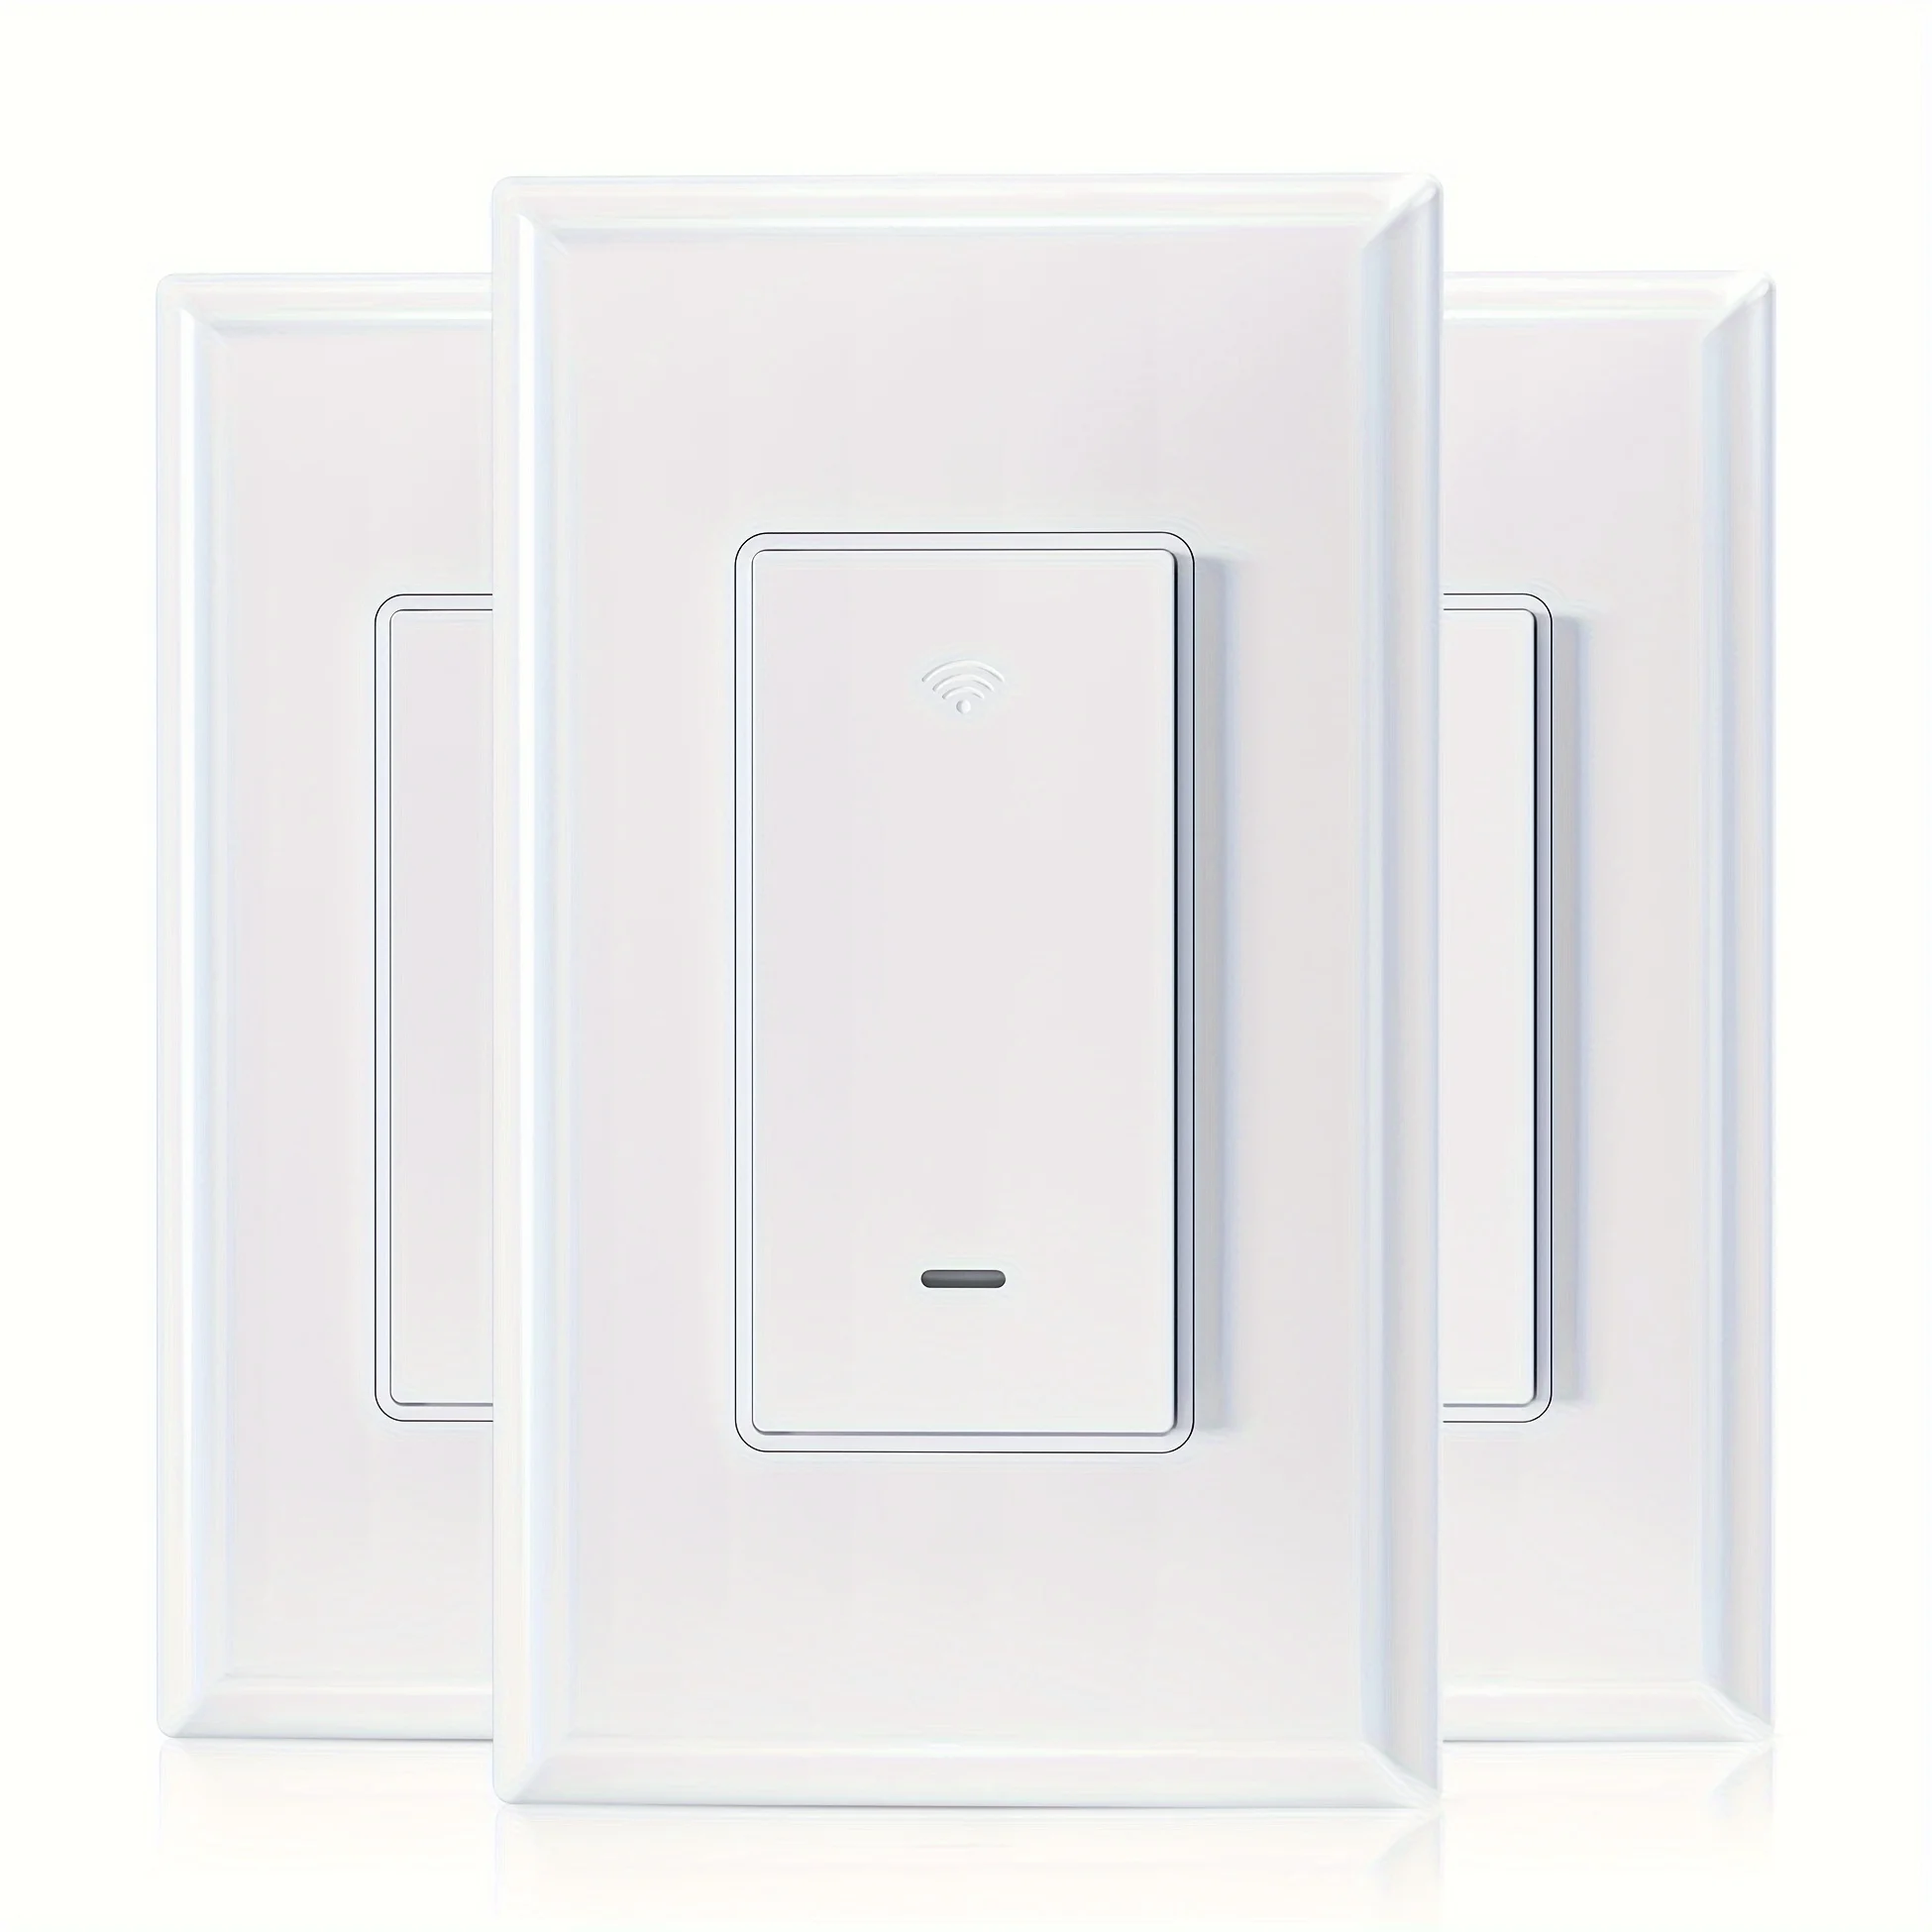 

Smart Light Switch, 3 Way WiFi Smart Switch, Compatible with Alexa and Google Home, Neutral Wire Required, 2.4Ghz WiFi Switch fo